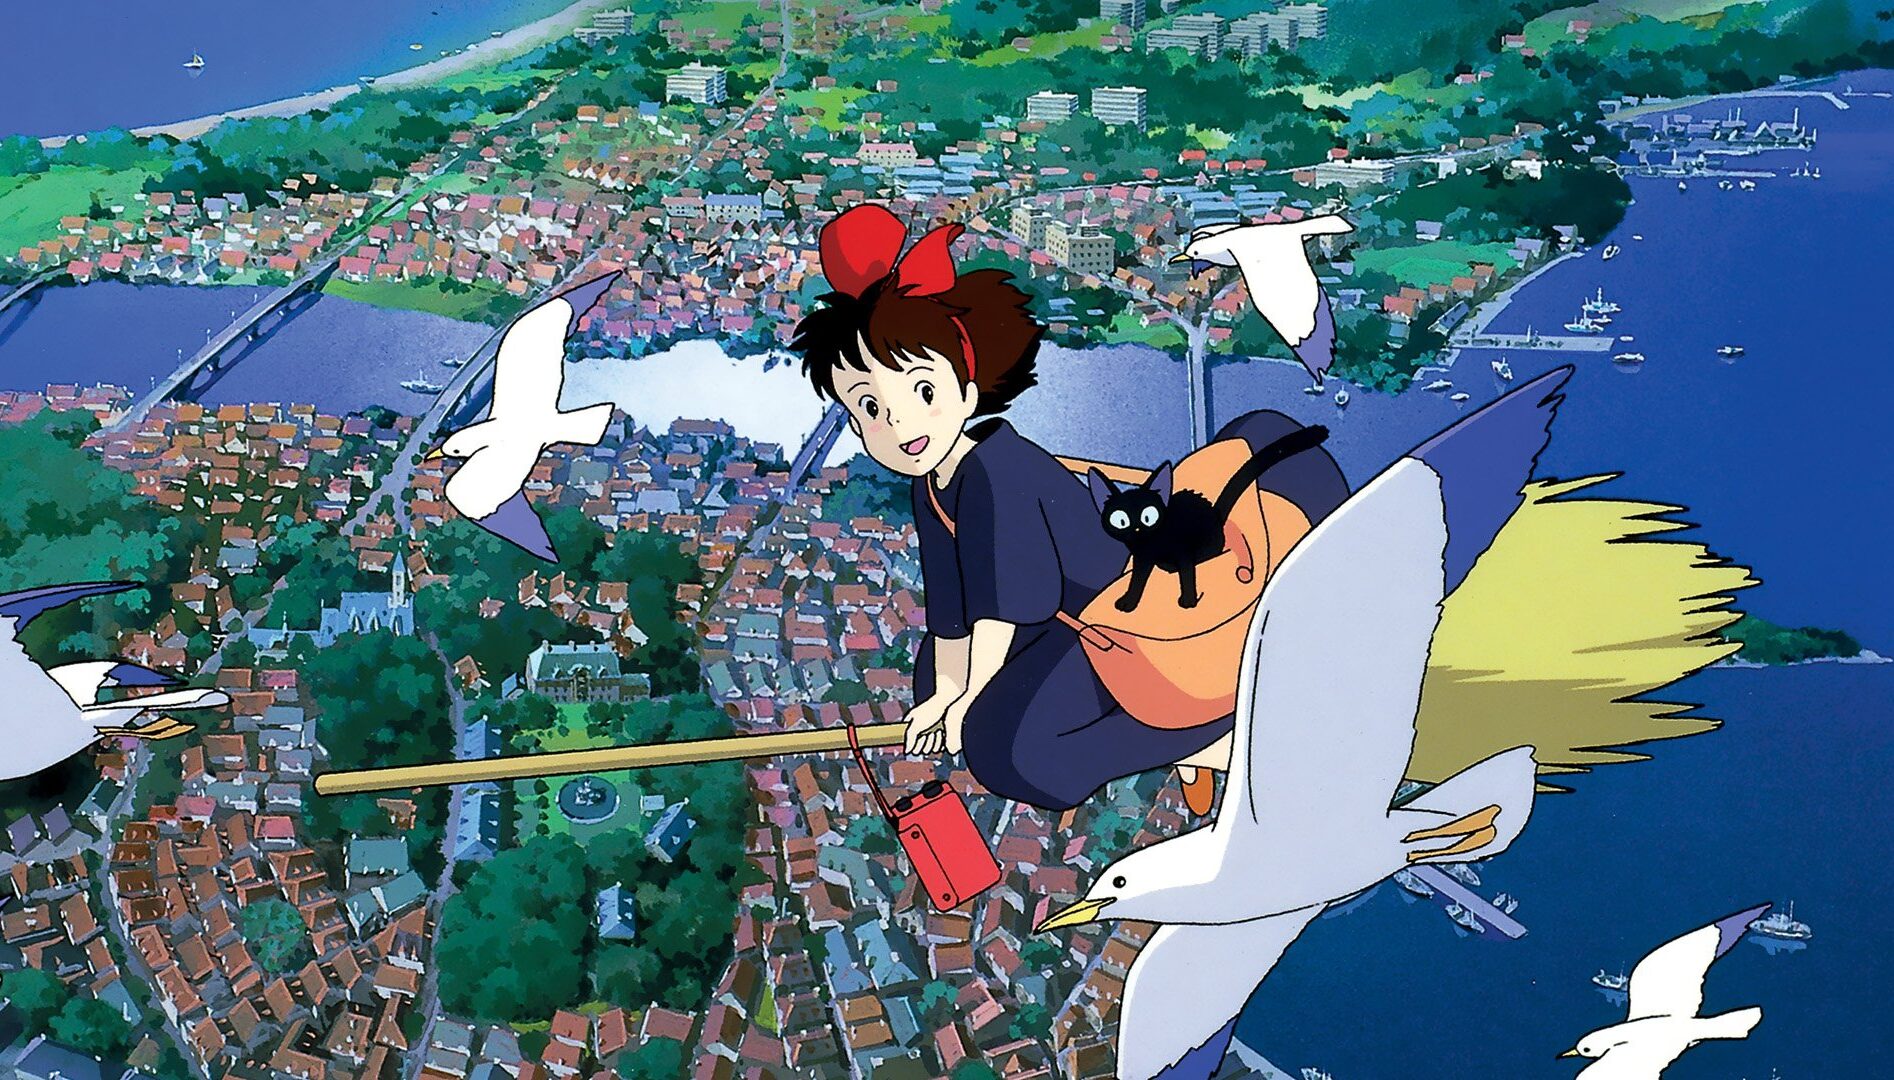 Film still of a girl riding in the air on a broomstick over a city, with birds flying to either side of her